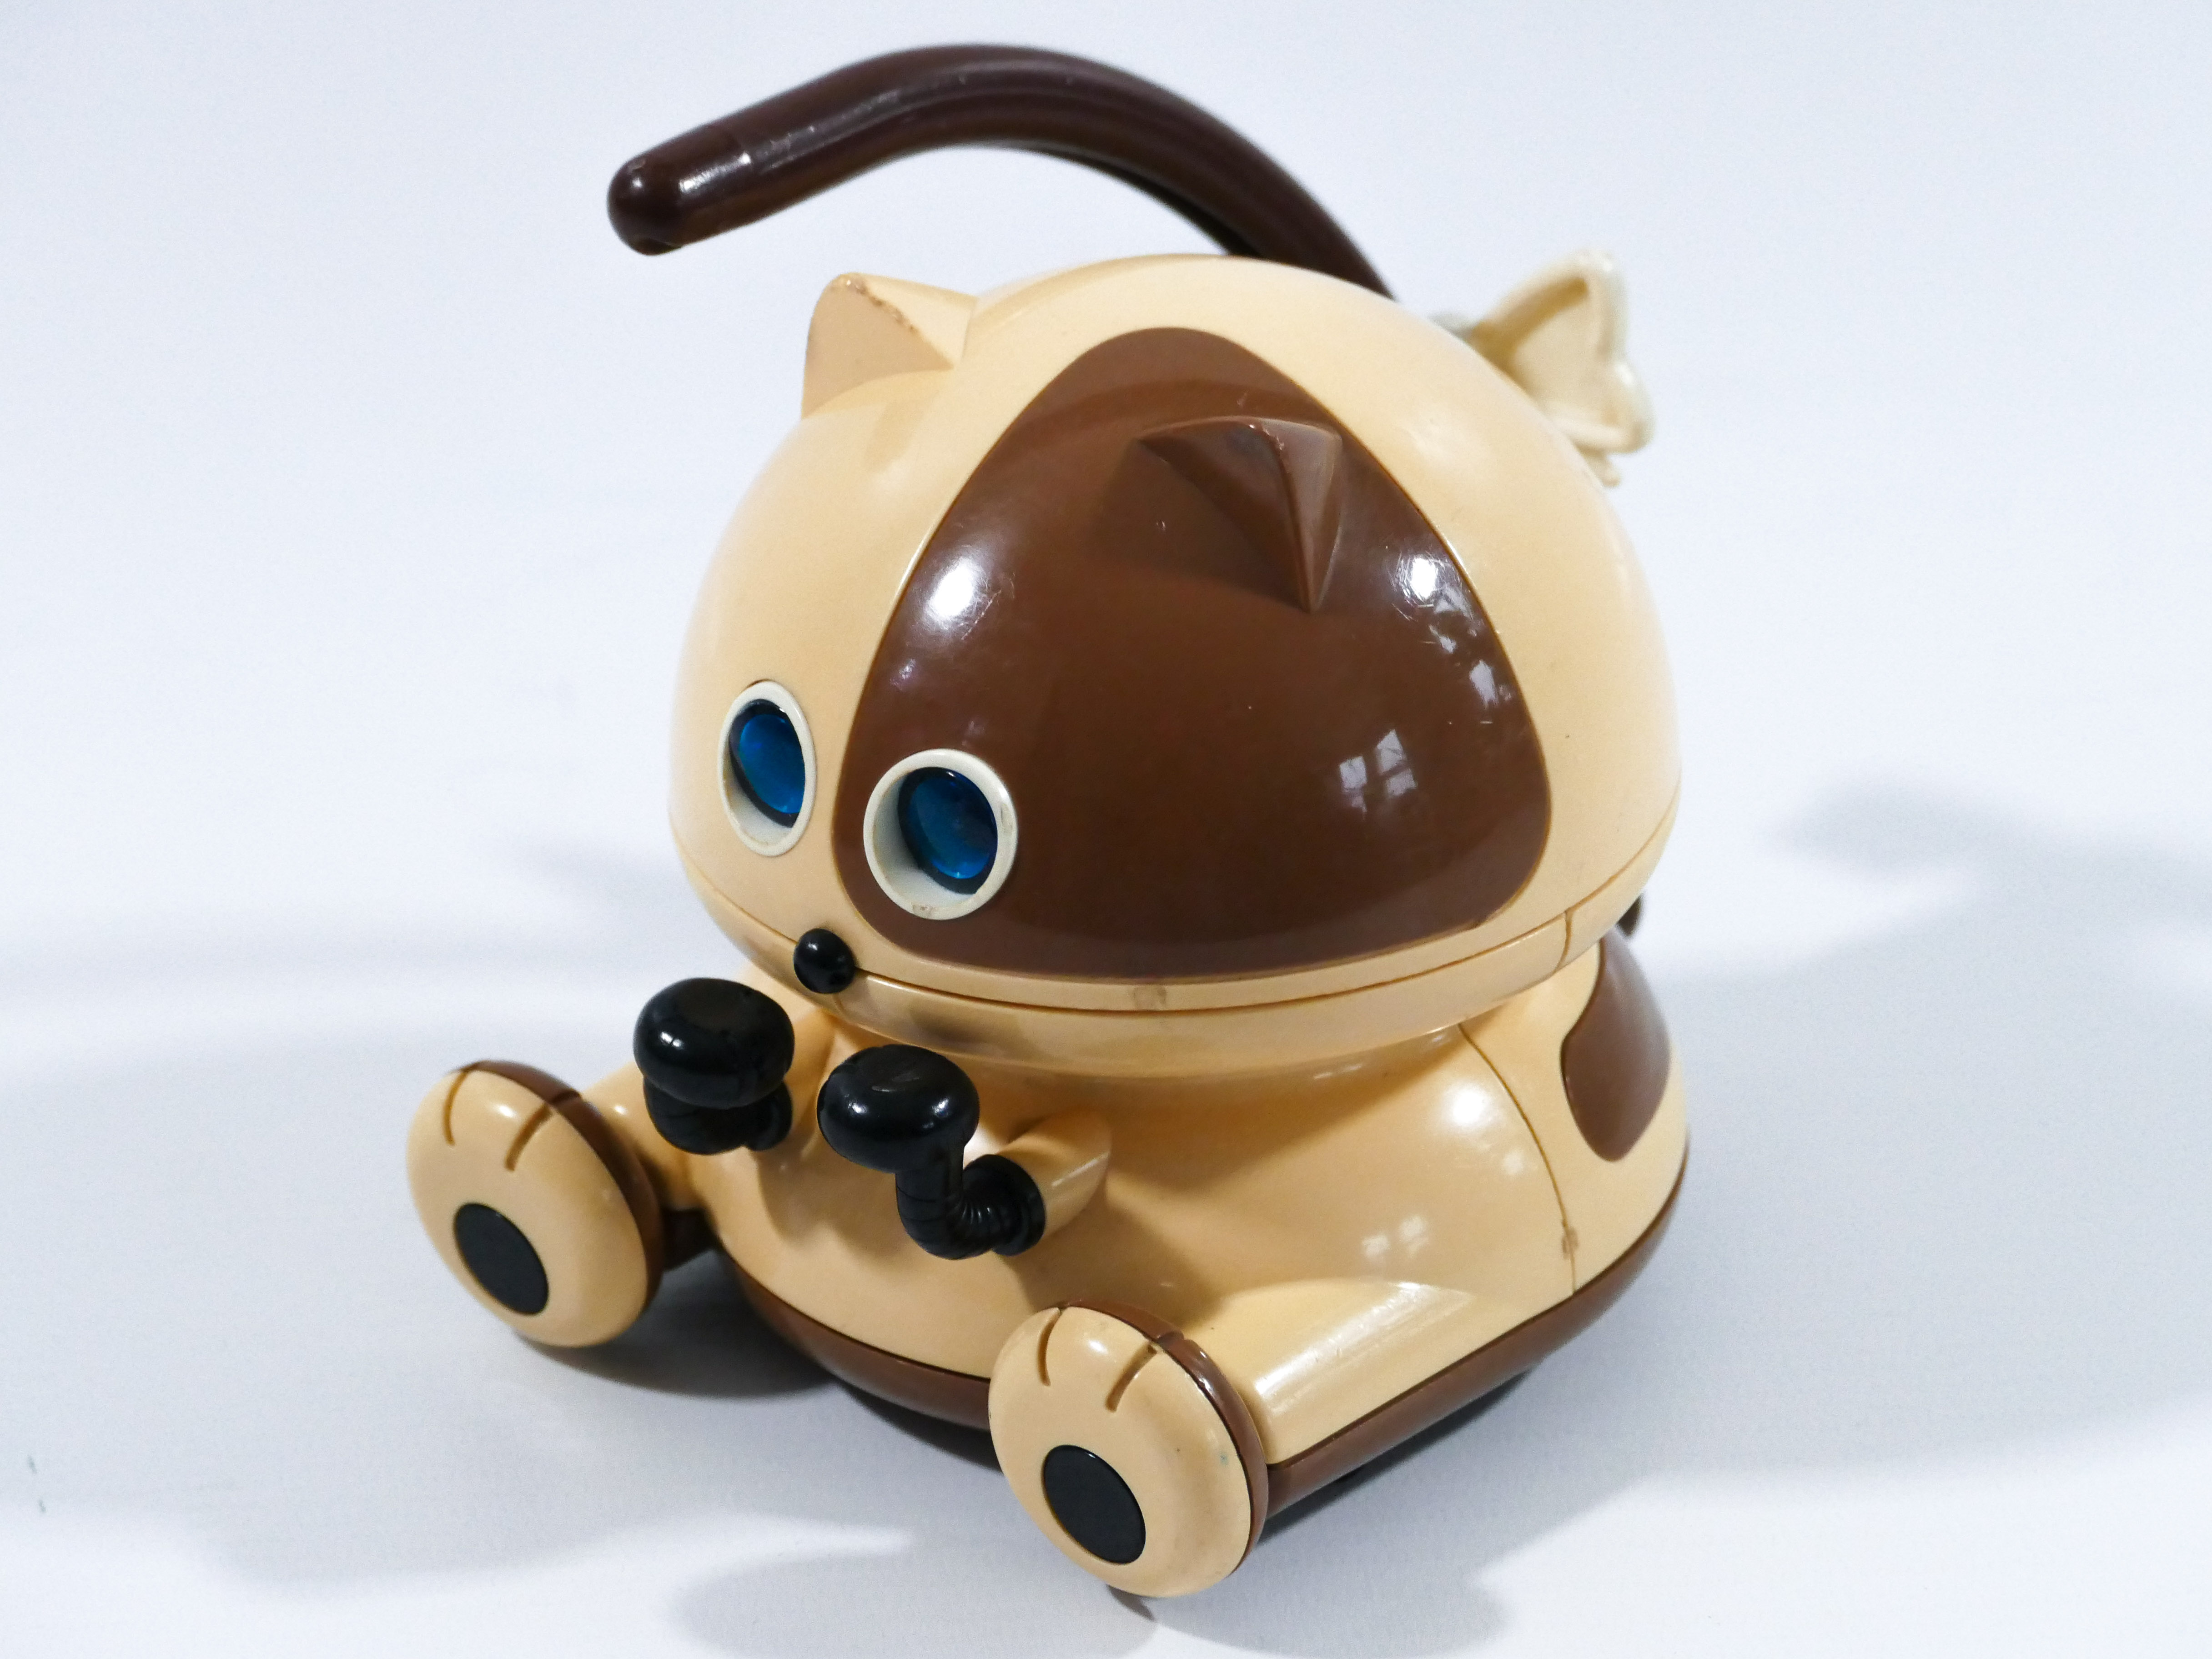 TOMY NYANKO ROBOT CAT ELECTRONIC PET OMNIBOT BATTERY OPERATED VINTAGE JAPAN SPACE TOY SONY AIBO